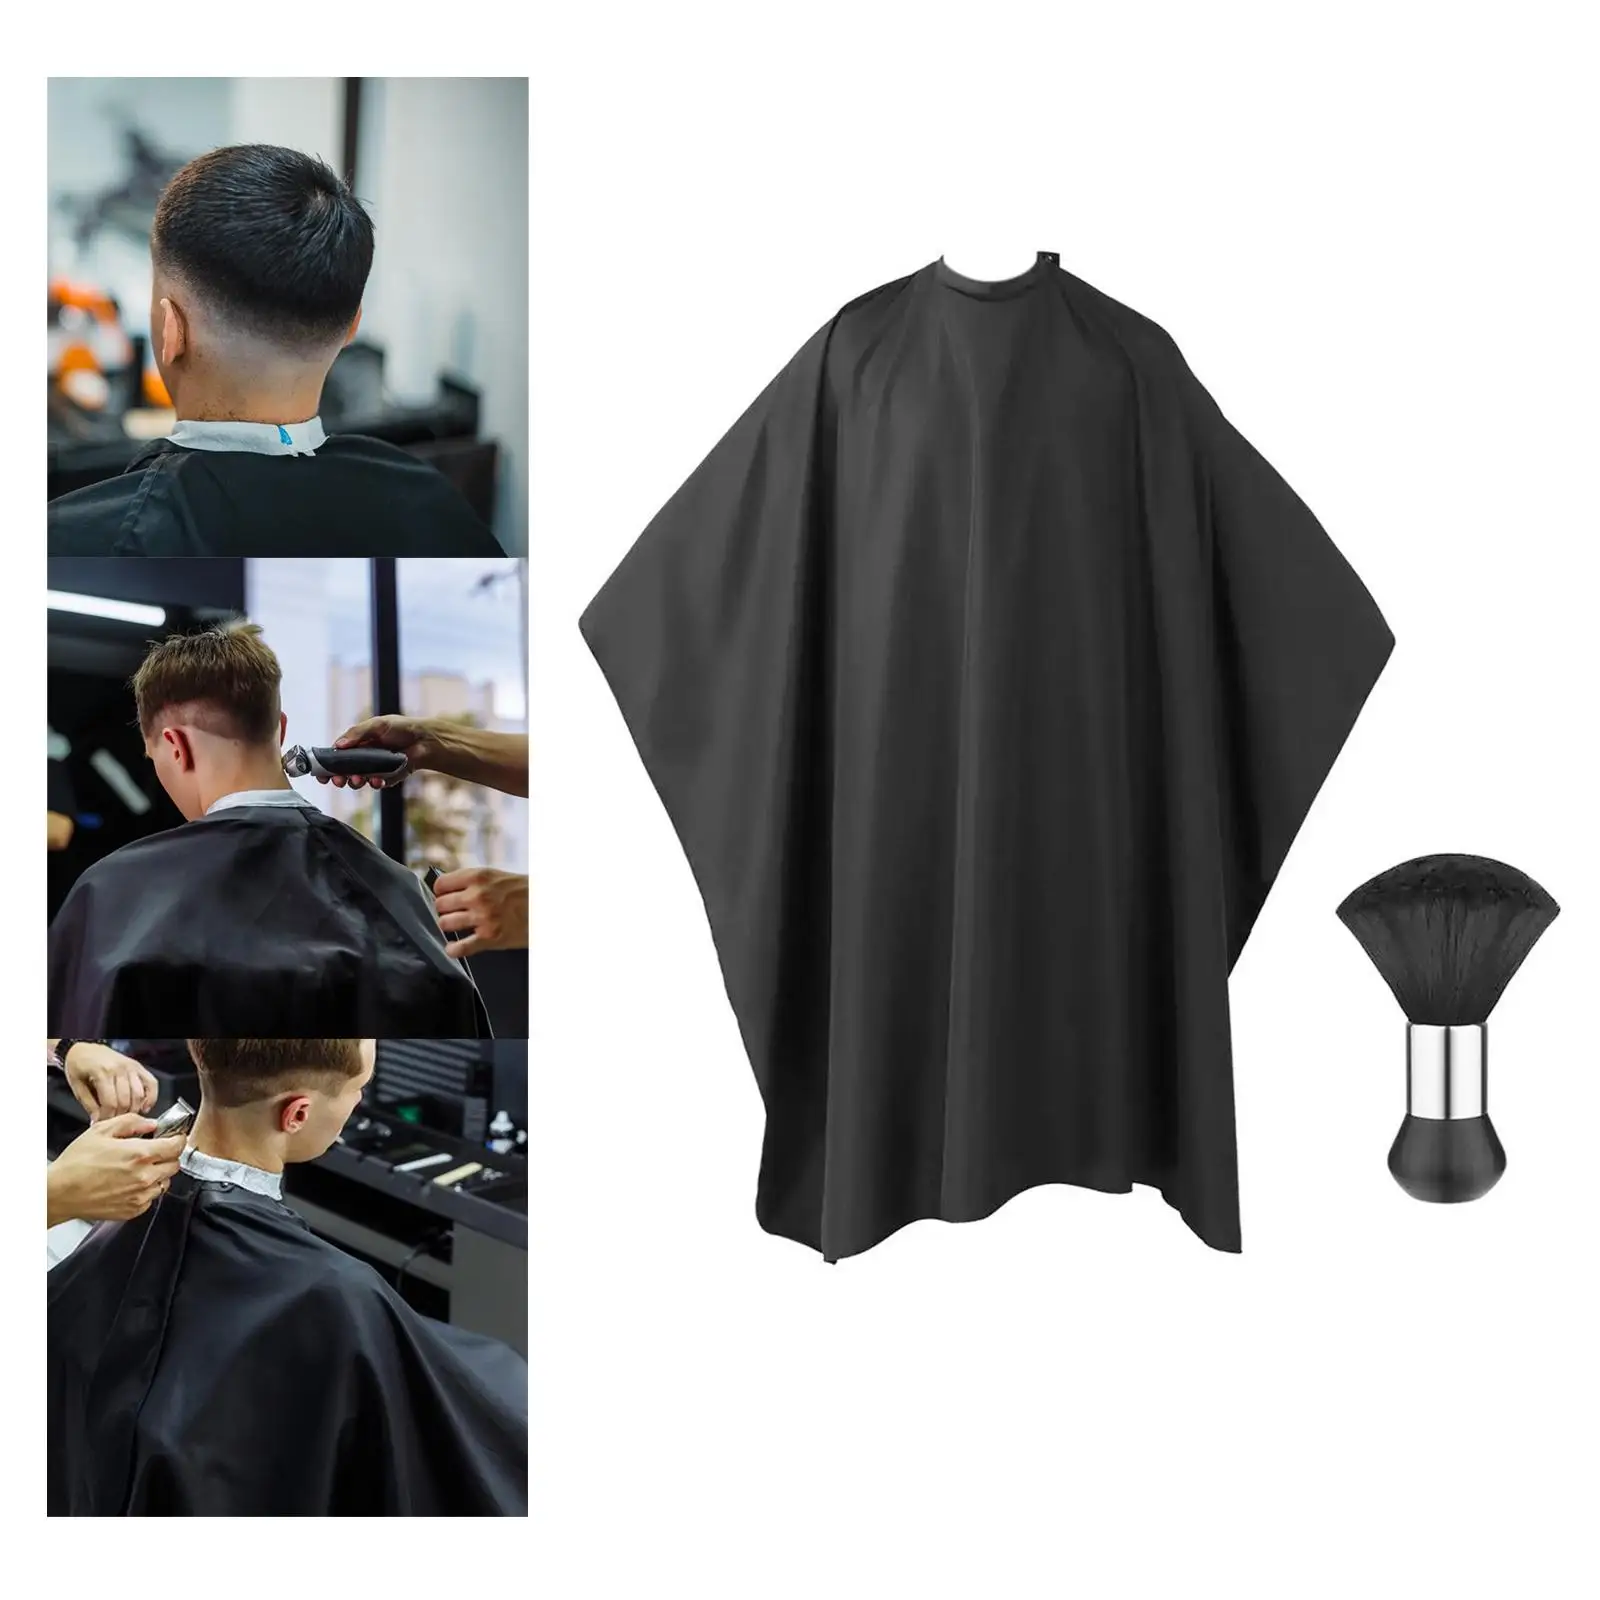 Hairdresser Cape Black Waterproof for Men Women and Kids Hairstylists Salon Haircut